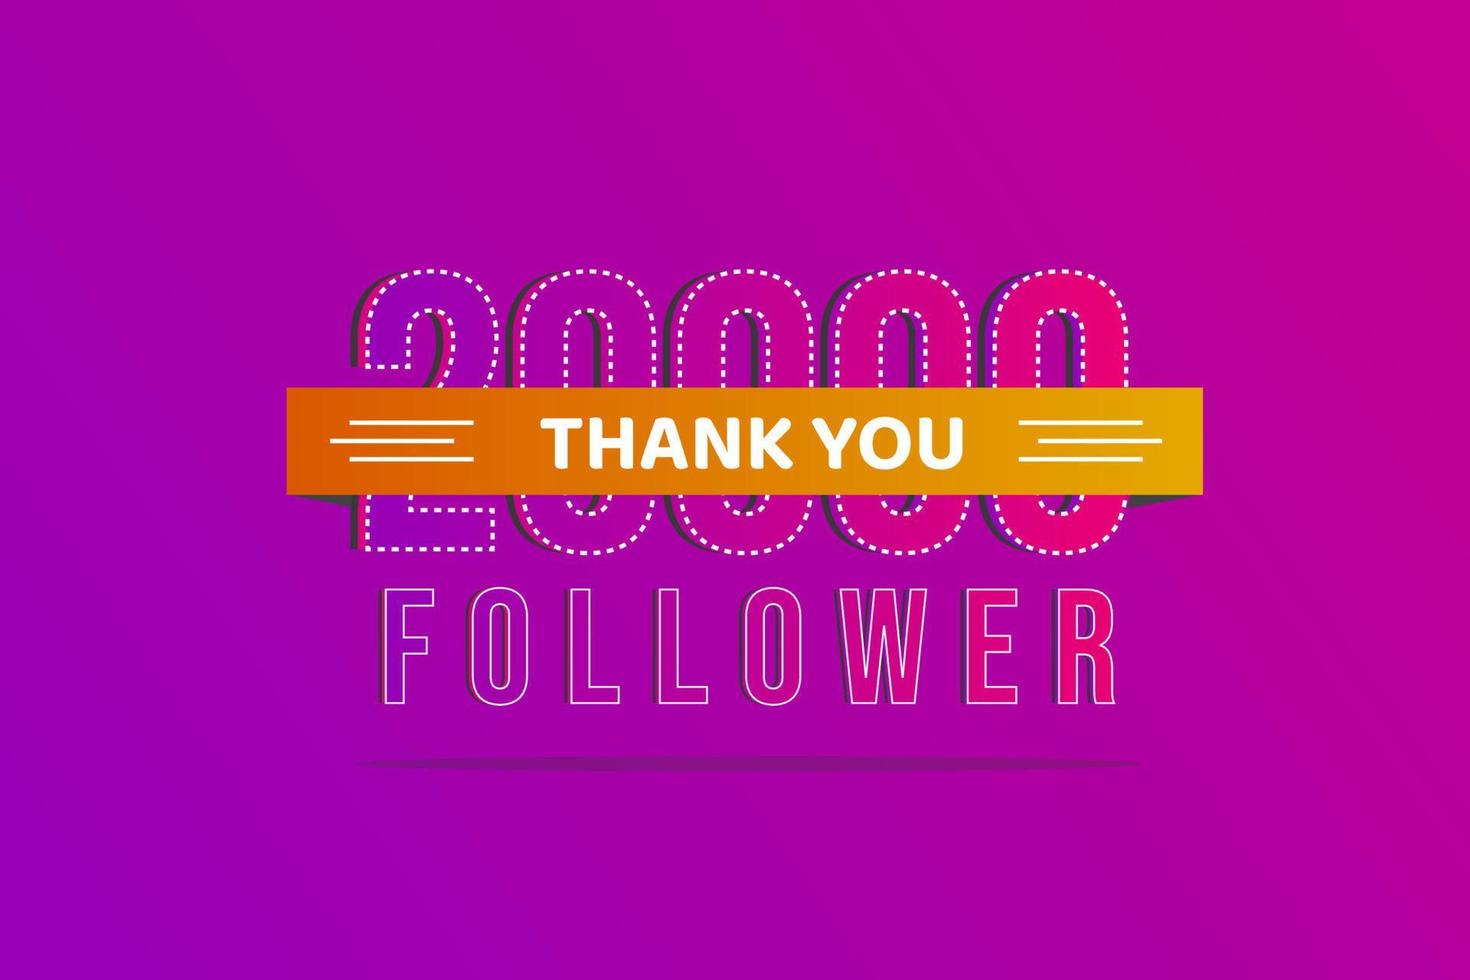 Thank you 20000 followers thank you banner.First 20K followers congratulation card with numbers vector